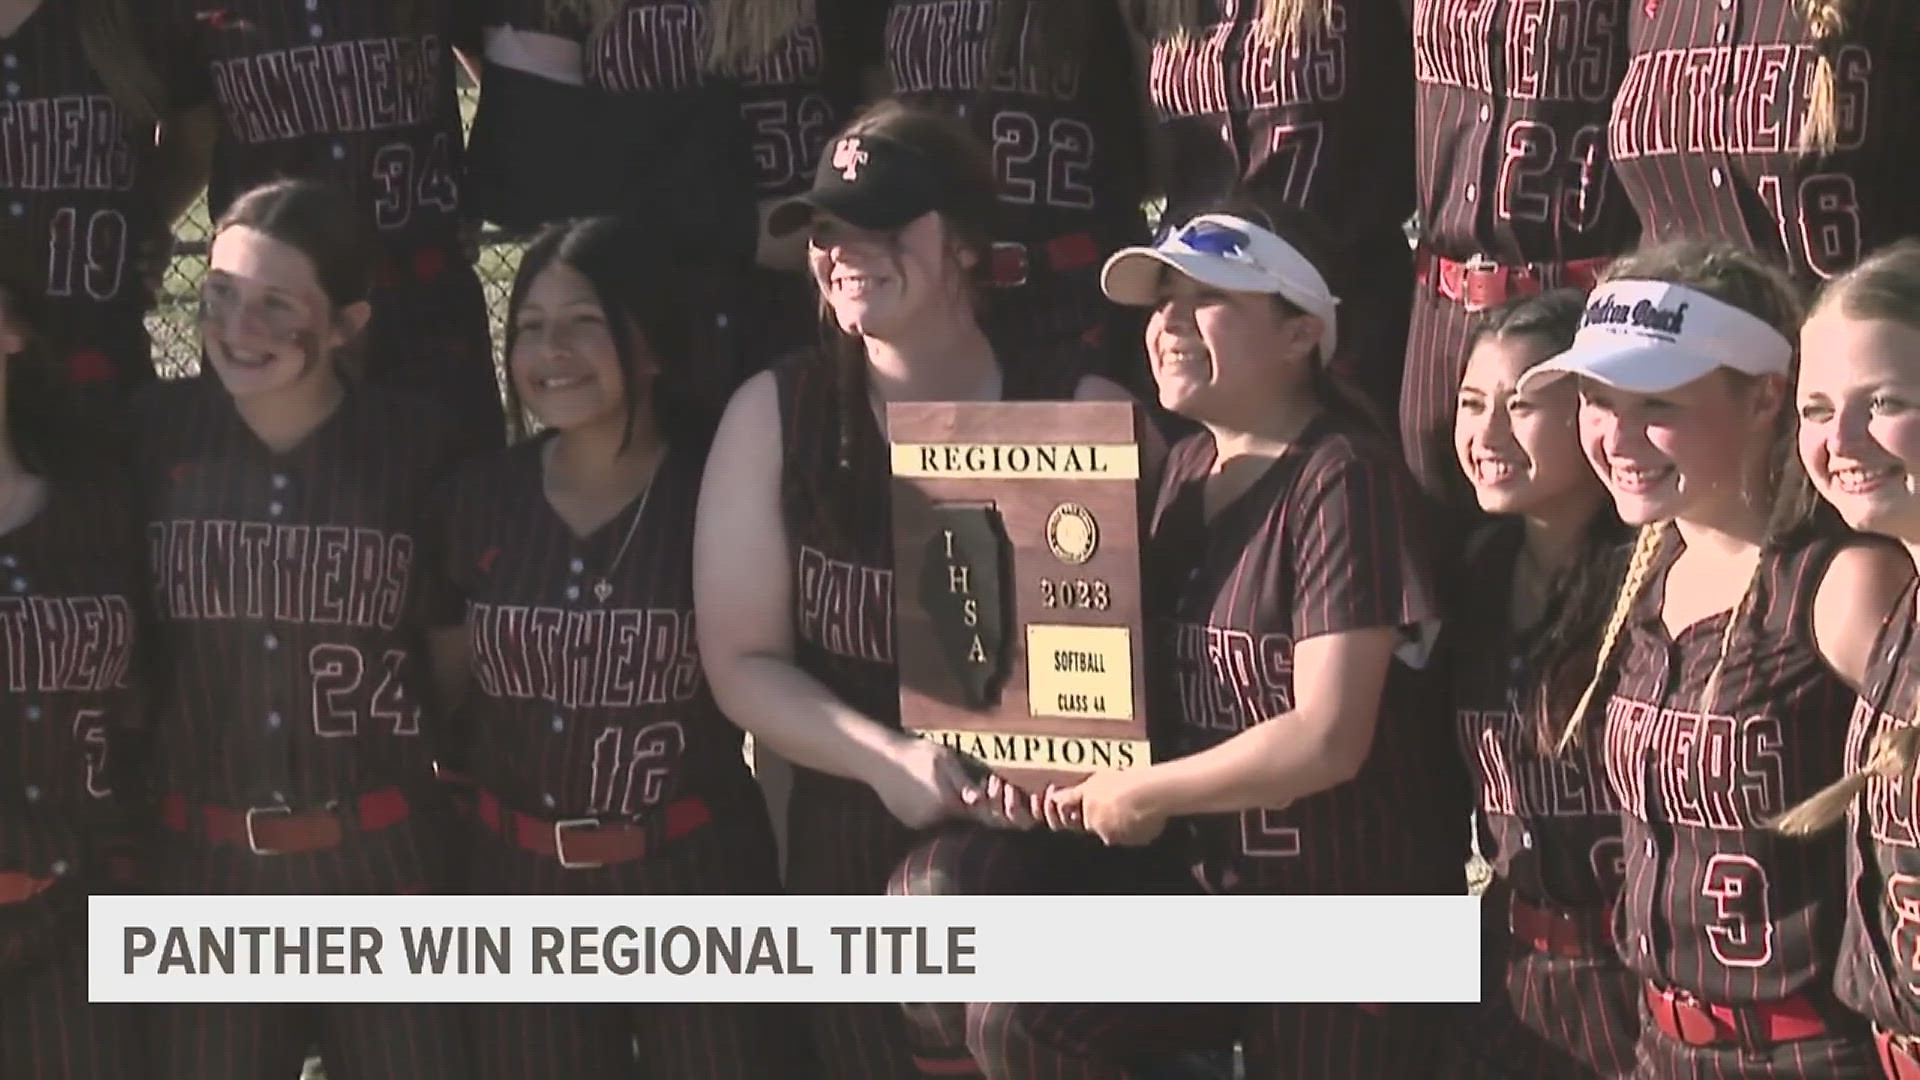 United Township scores six times in the 8th inning to beat Pekin 12-10 to win the Regional Crown.